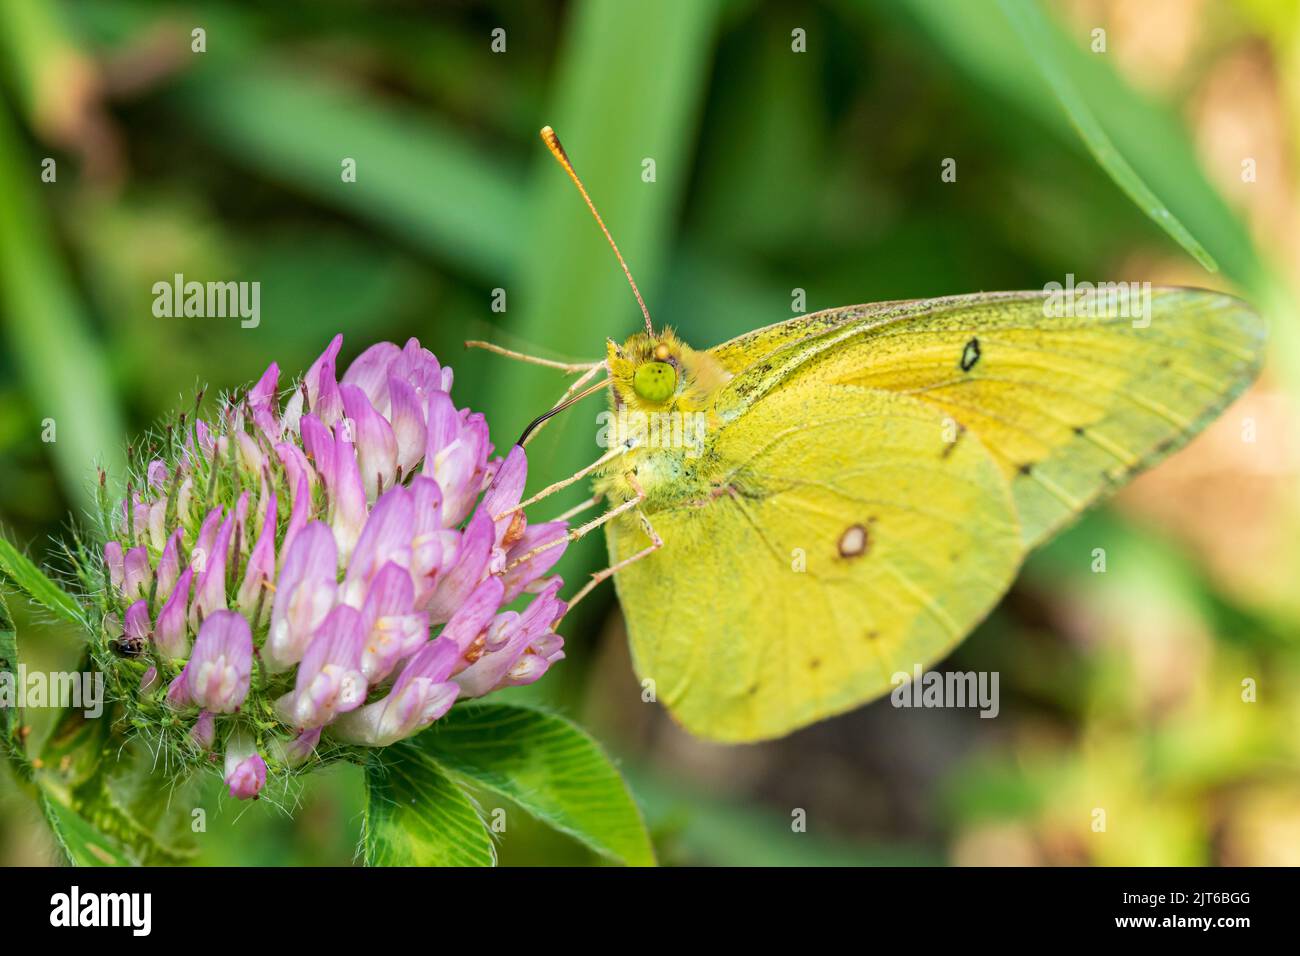 Orange Sulphur butterfly on alfalfa plant. Insect and nature conservation, habitat preservation, and backyard flower garden concept Stock Photo